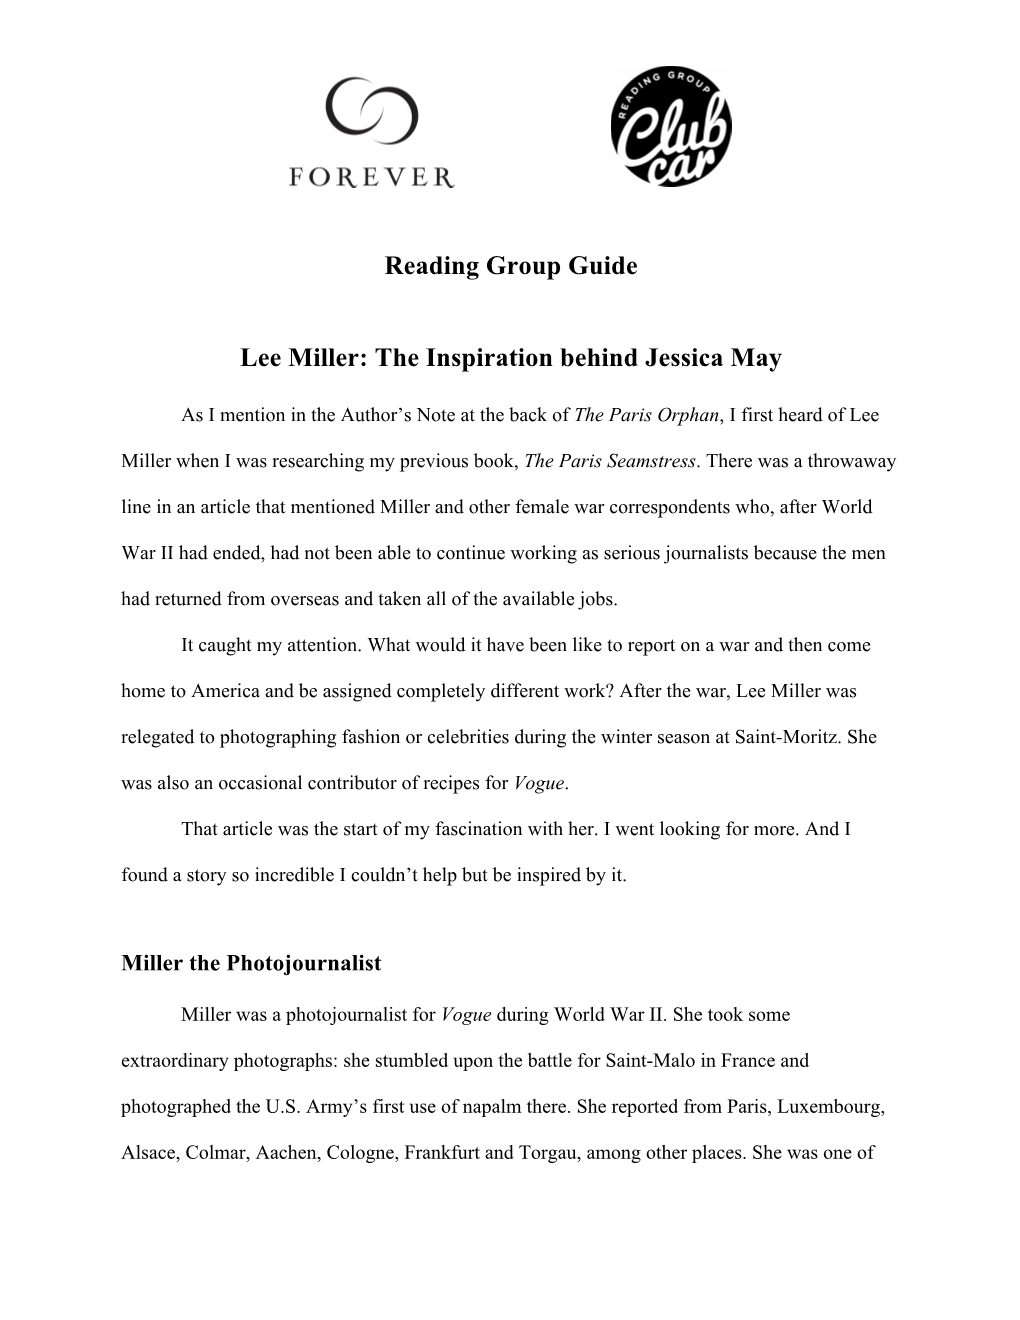 Reading Group Guide Lee Miller: the Inspiration Behind Jessica